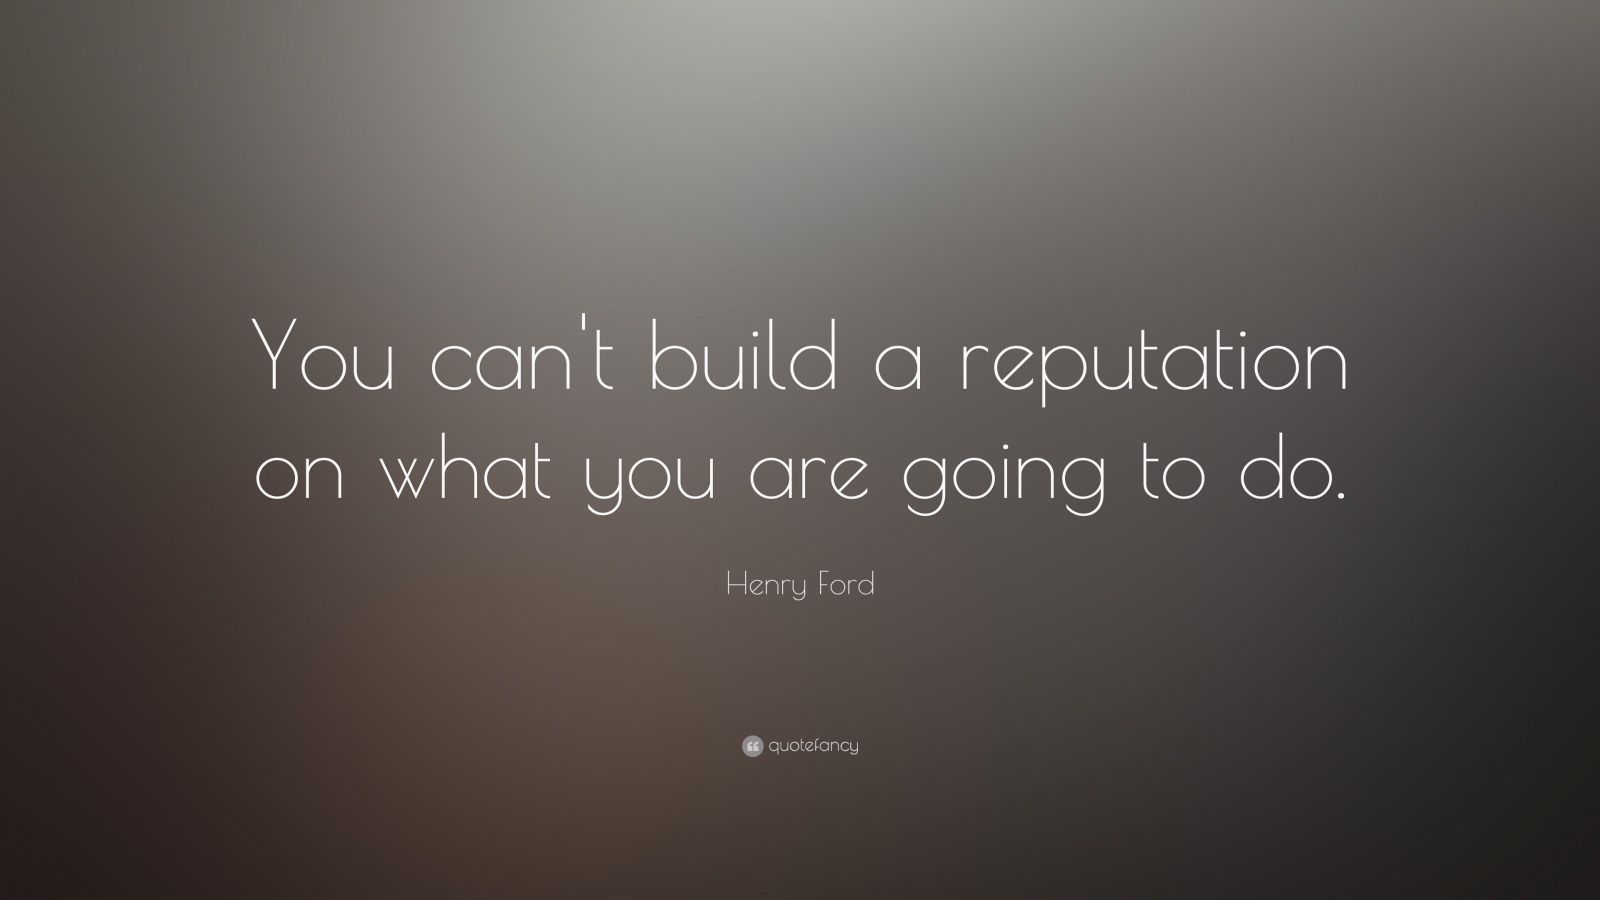 Henry ford quote reputation #2